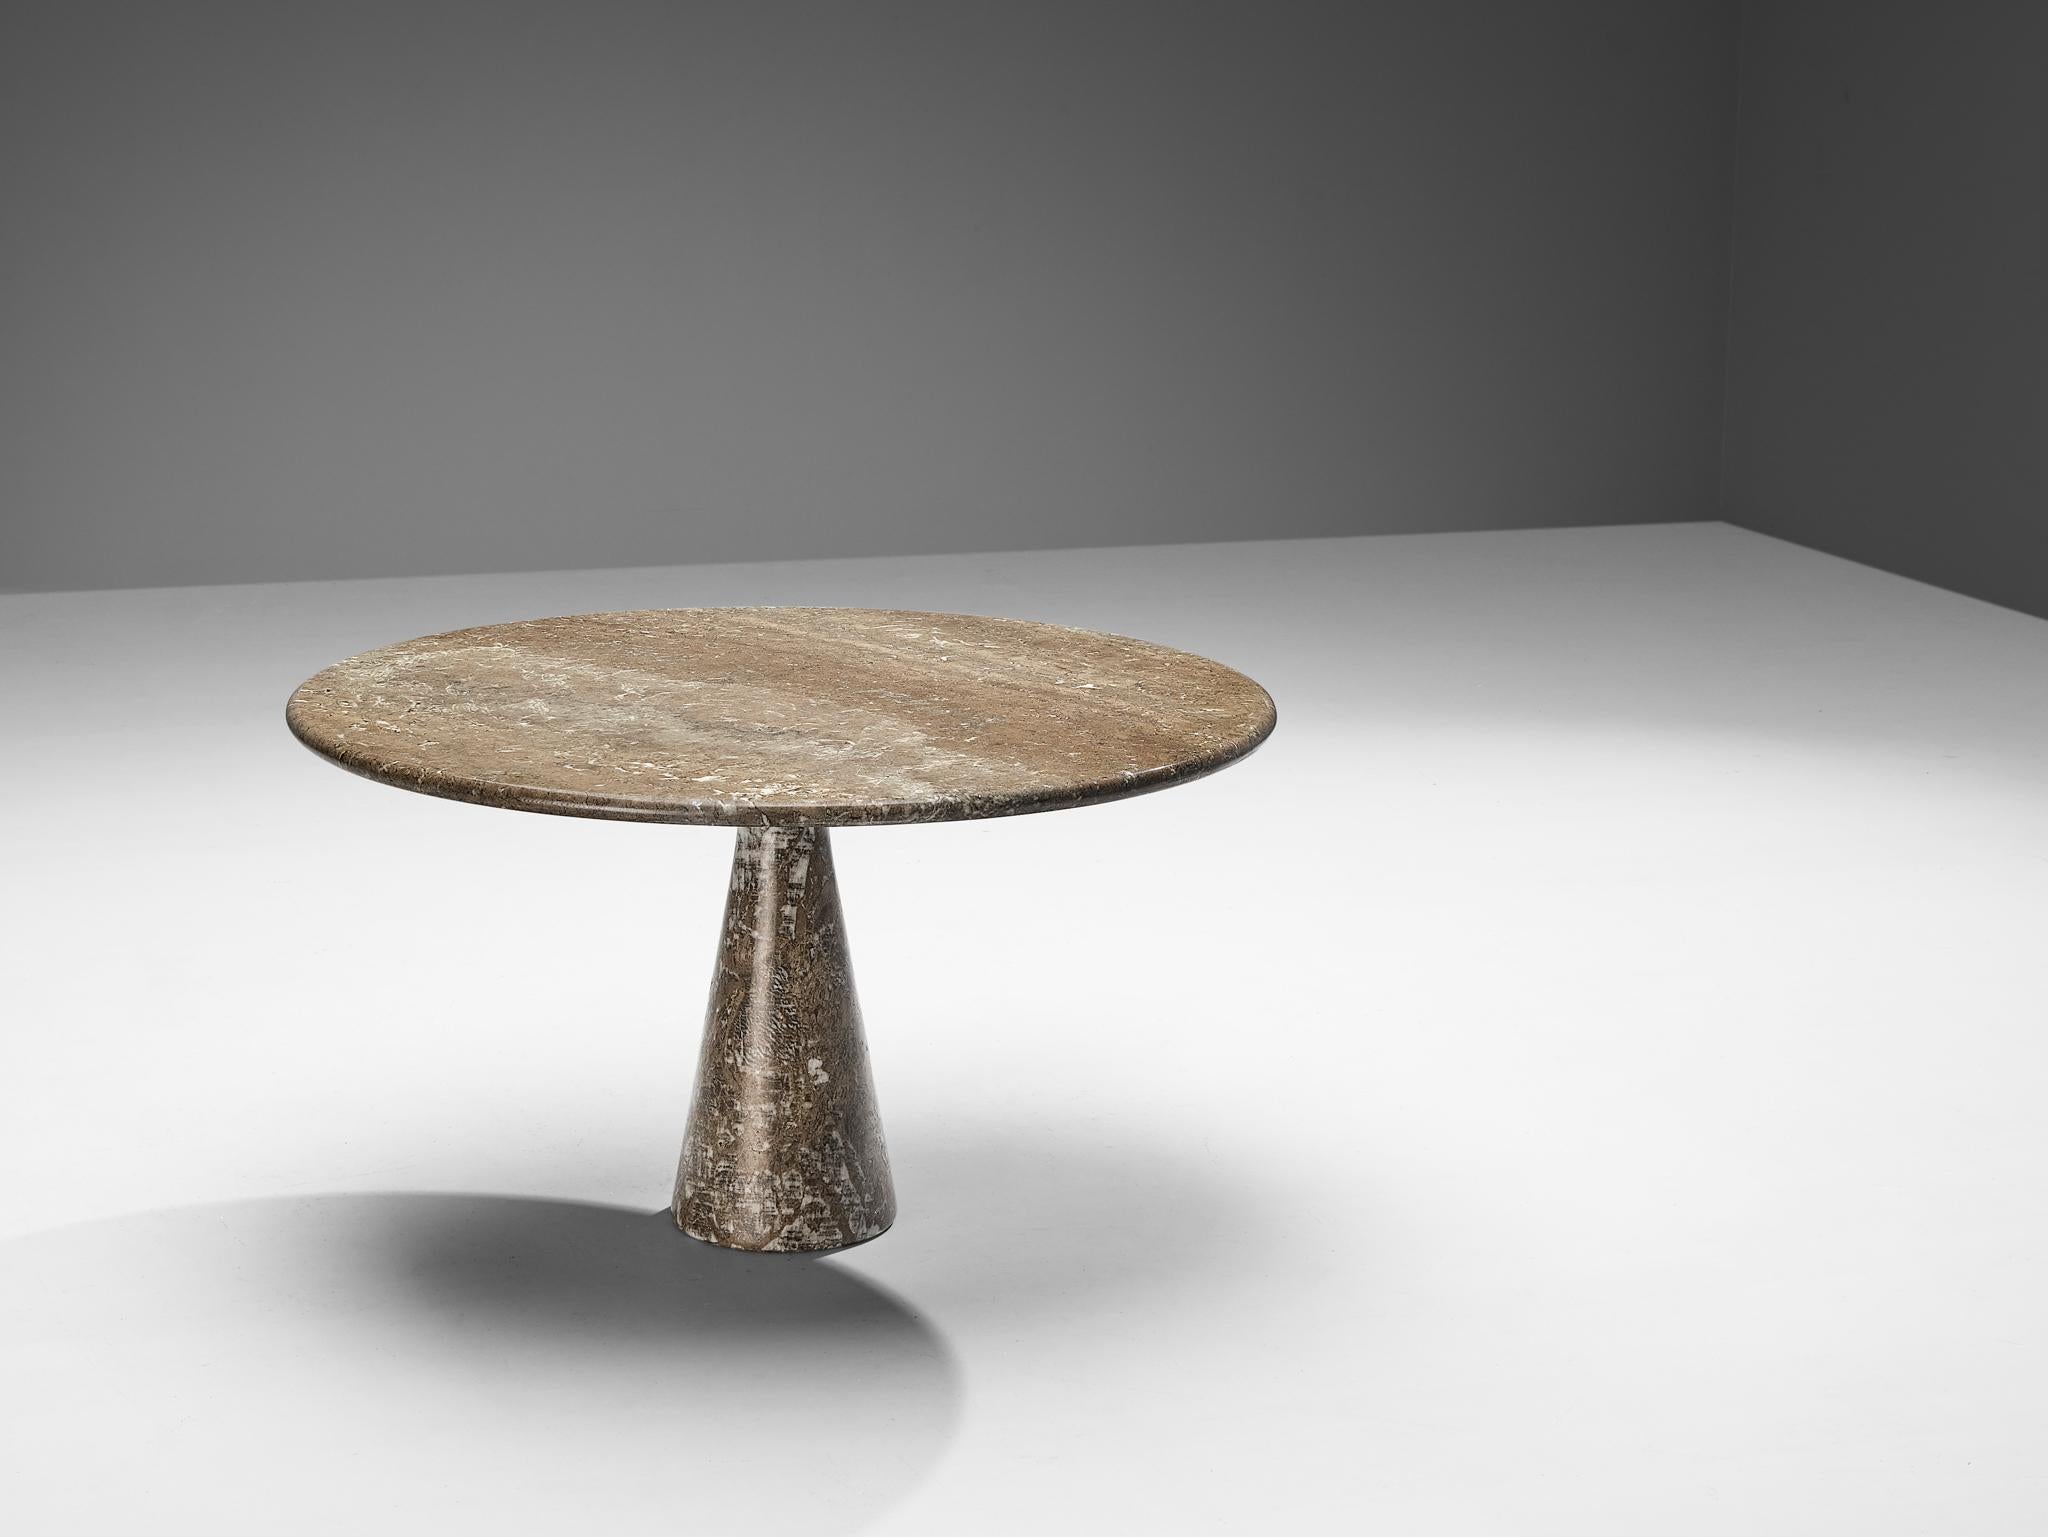 Angelo Mangiarotti for Skipper, dining table ‘M1’, marble, design 1969

This sculptural table by Angelo Mangiarotti is a skilful example of postmodern design. The strikingly brown-toned marble table has a cone-shaped pedestal and a circular top